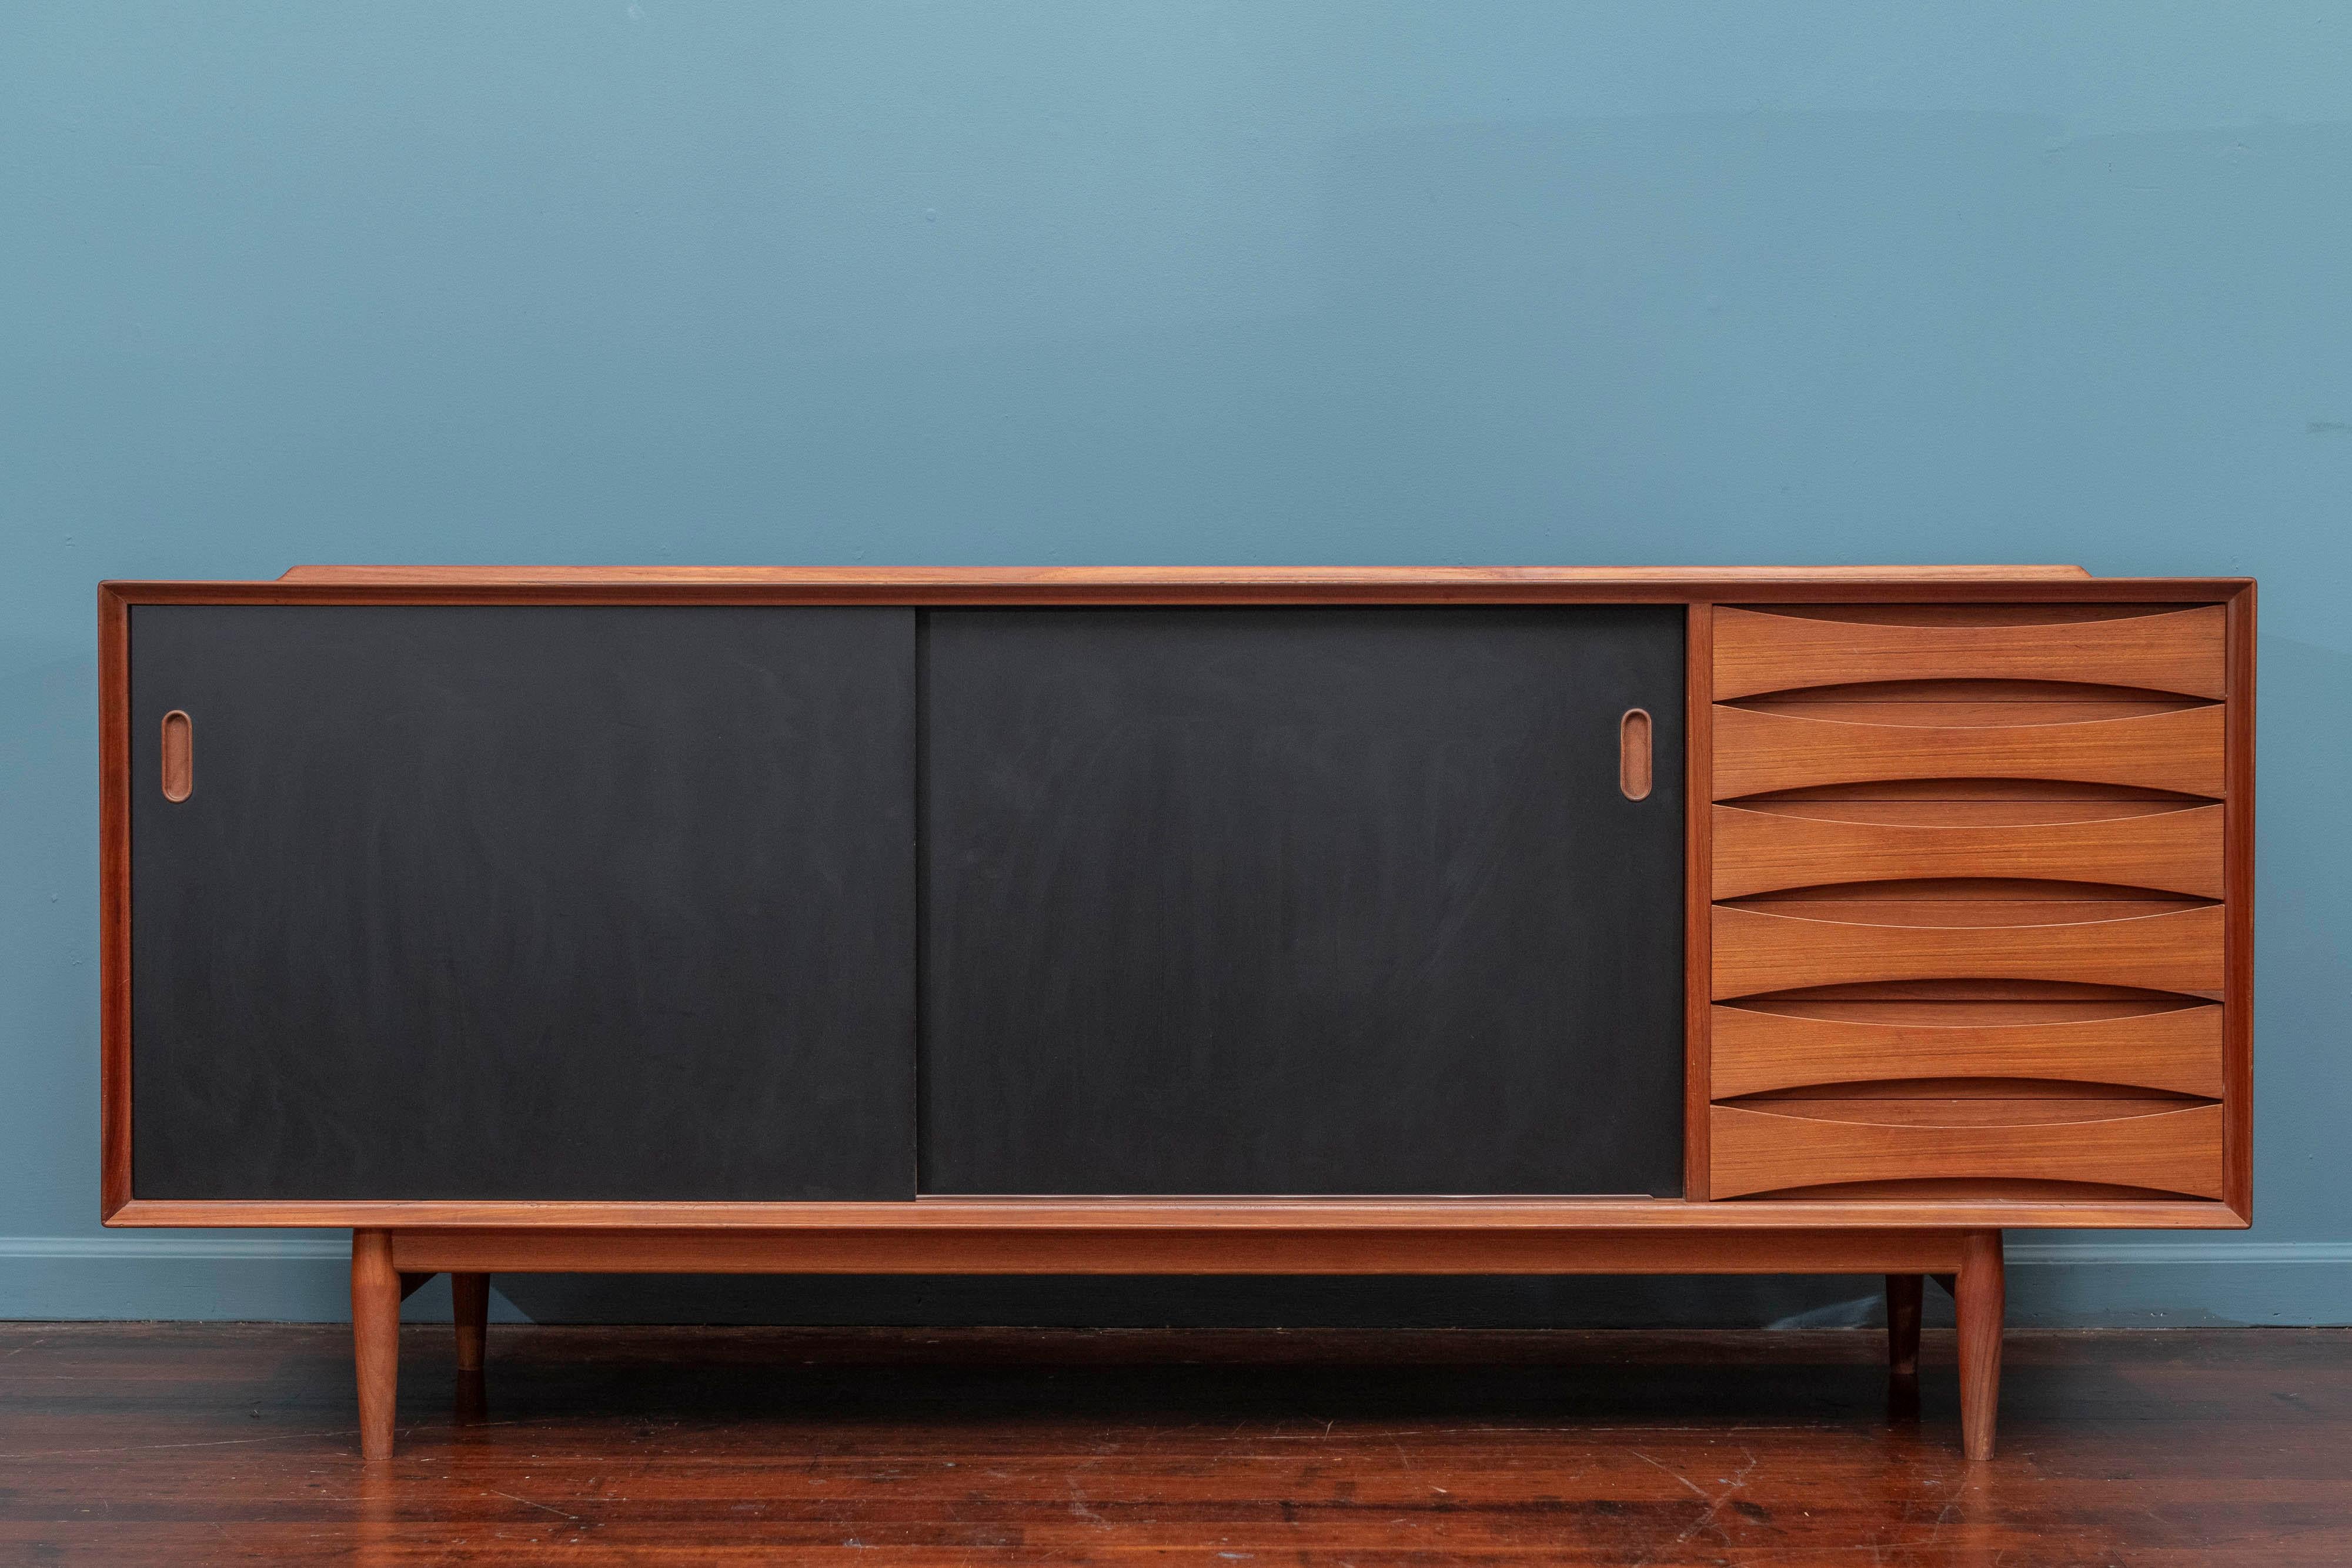 Arne Vodder model 29 credenza for Sibast, Denmark. Iconic design by one of Denmark's masters Arne Vodder's Model 29 credenza. High quality materials and construction techniques featuring adjustable interior shelves and five drawers offering ample